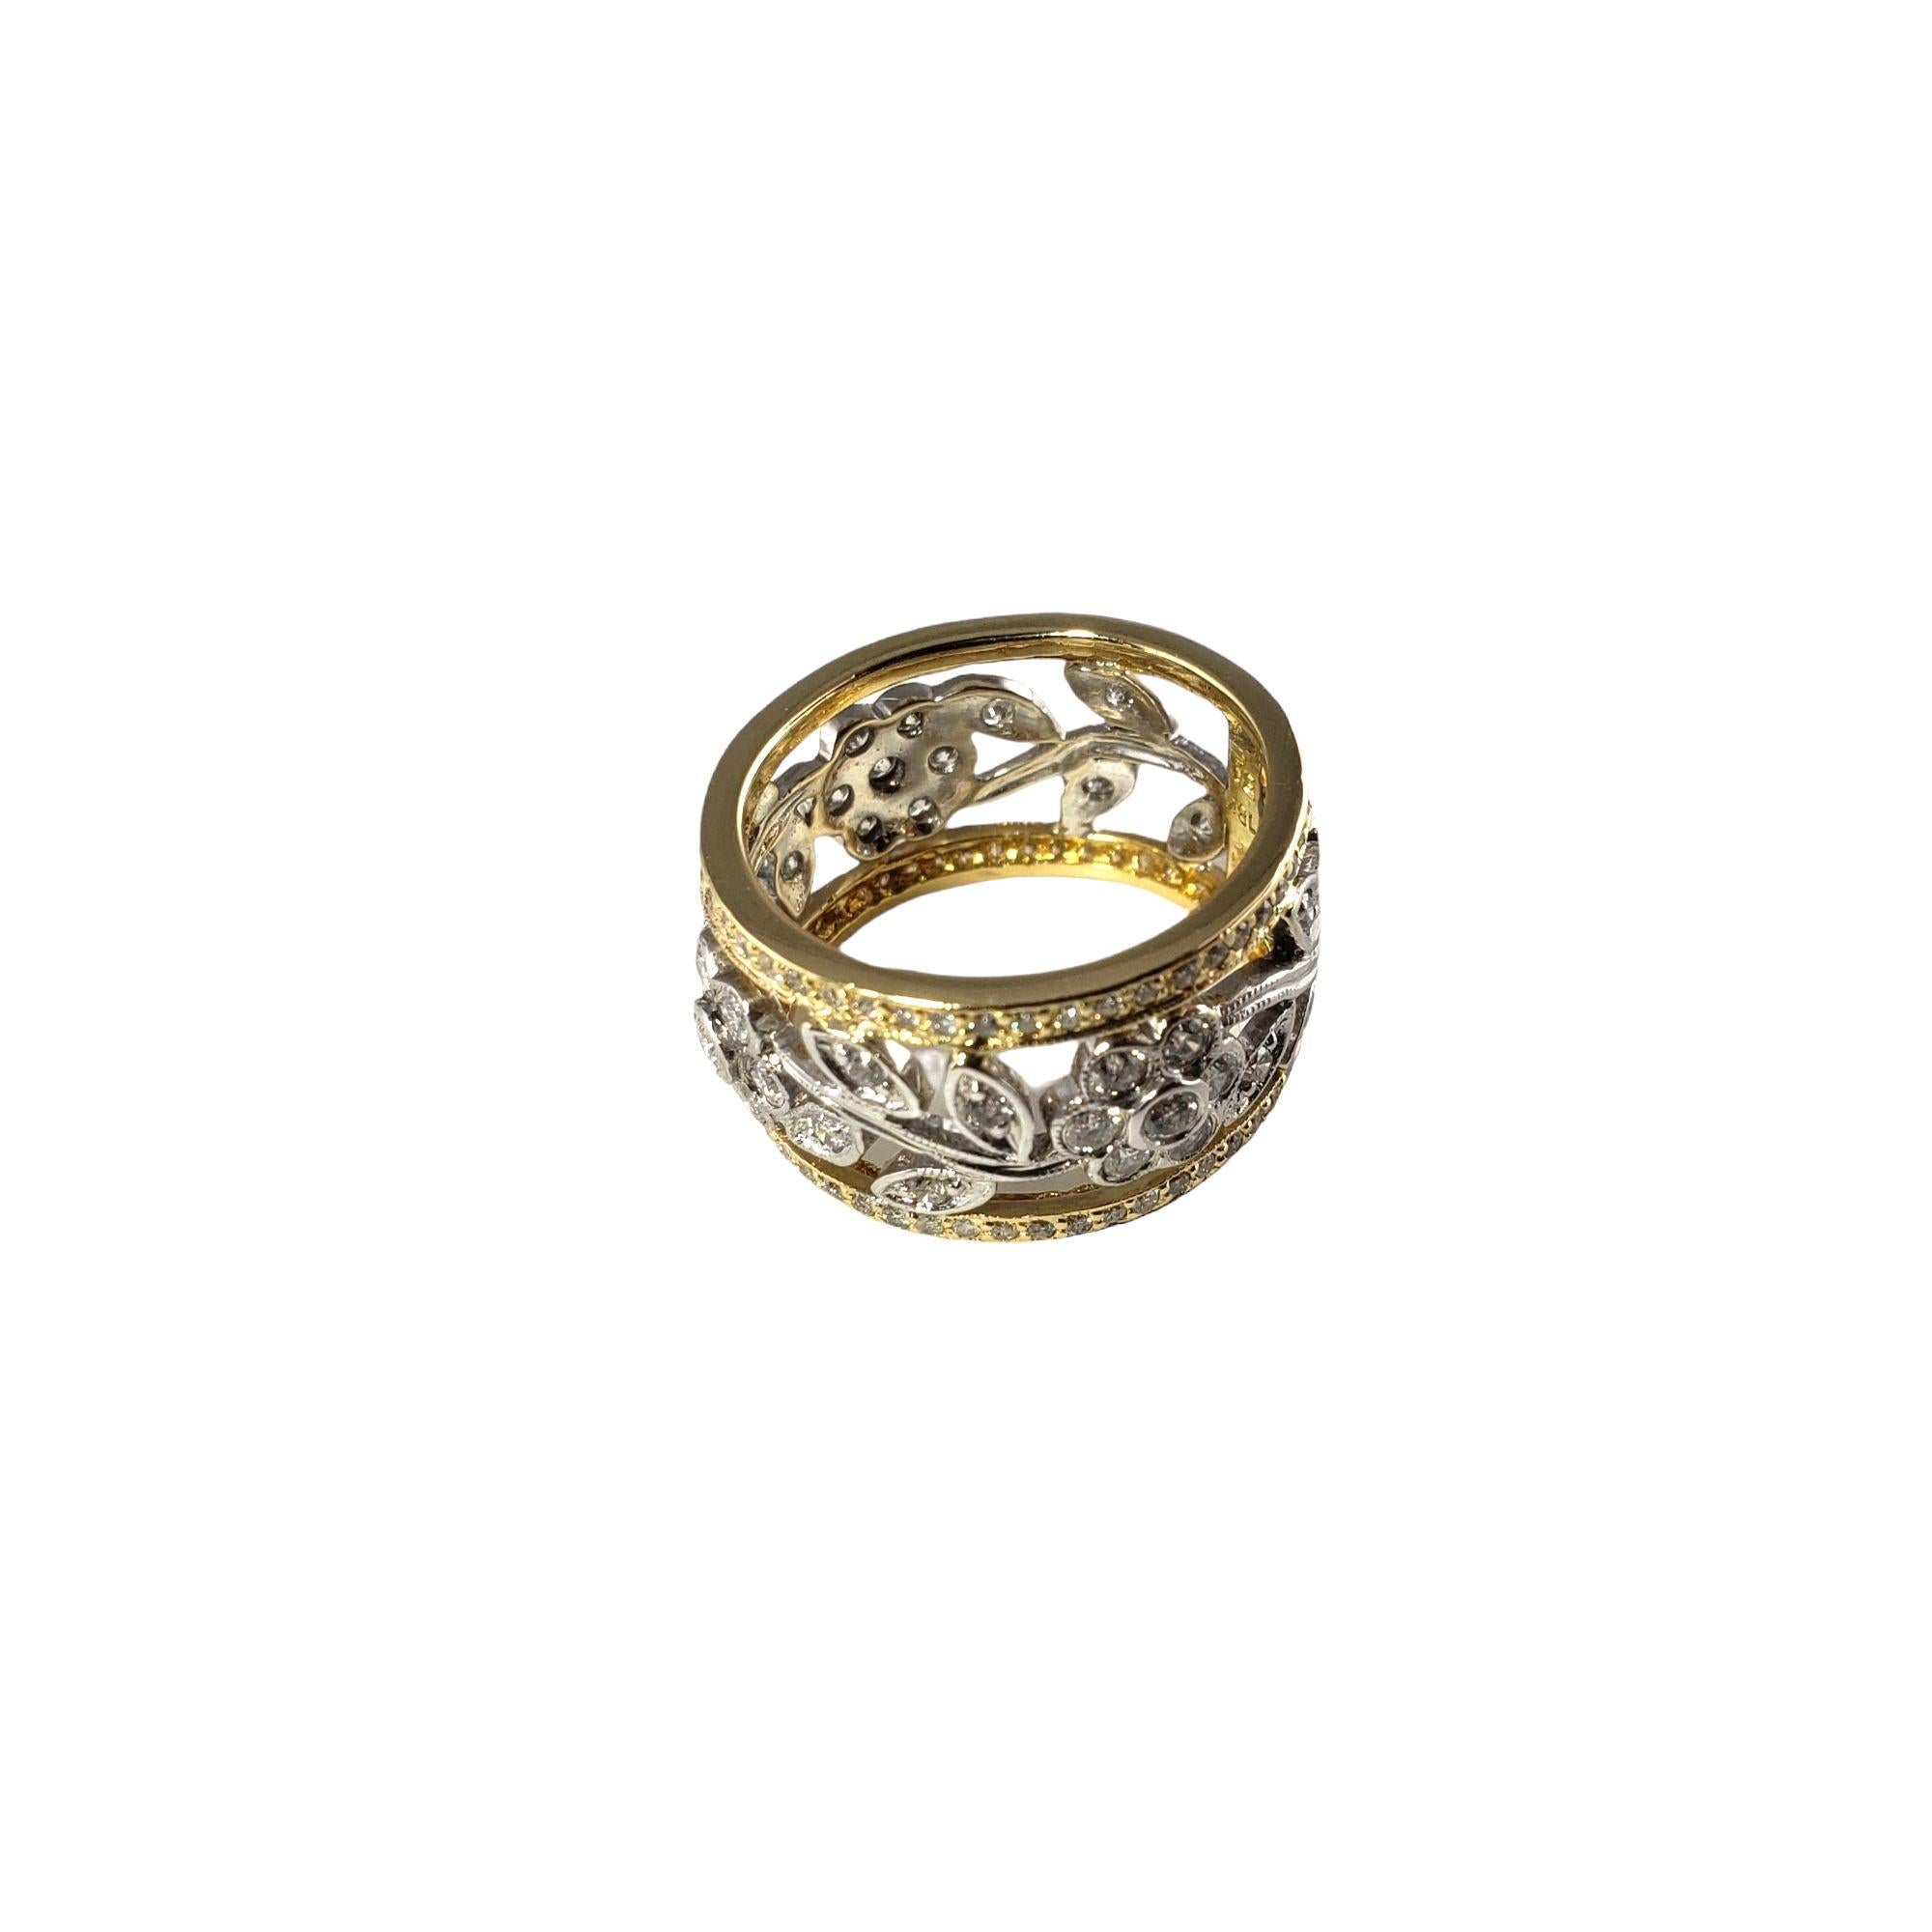 Vintage 18 Karat Two Tone Gold and Diamond Floral Band Ring Size 6.75-

This lovely 18K yellow and white gold ring features 133 round brilliant cut diamonds set in a stunning floral design.  Width:  12 mm.

Approximate total diamond weight:  2.0